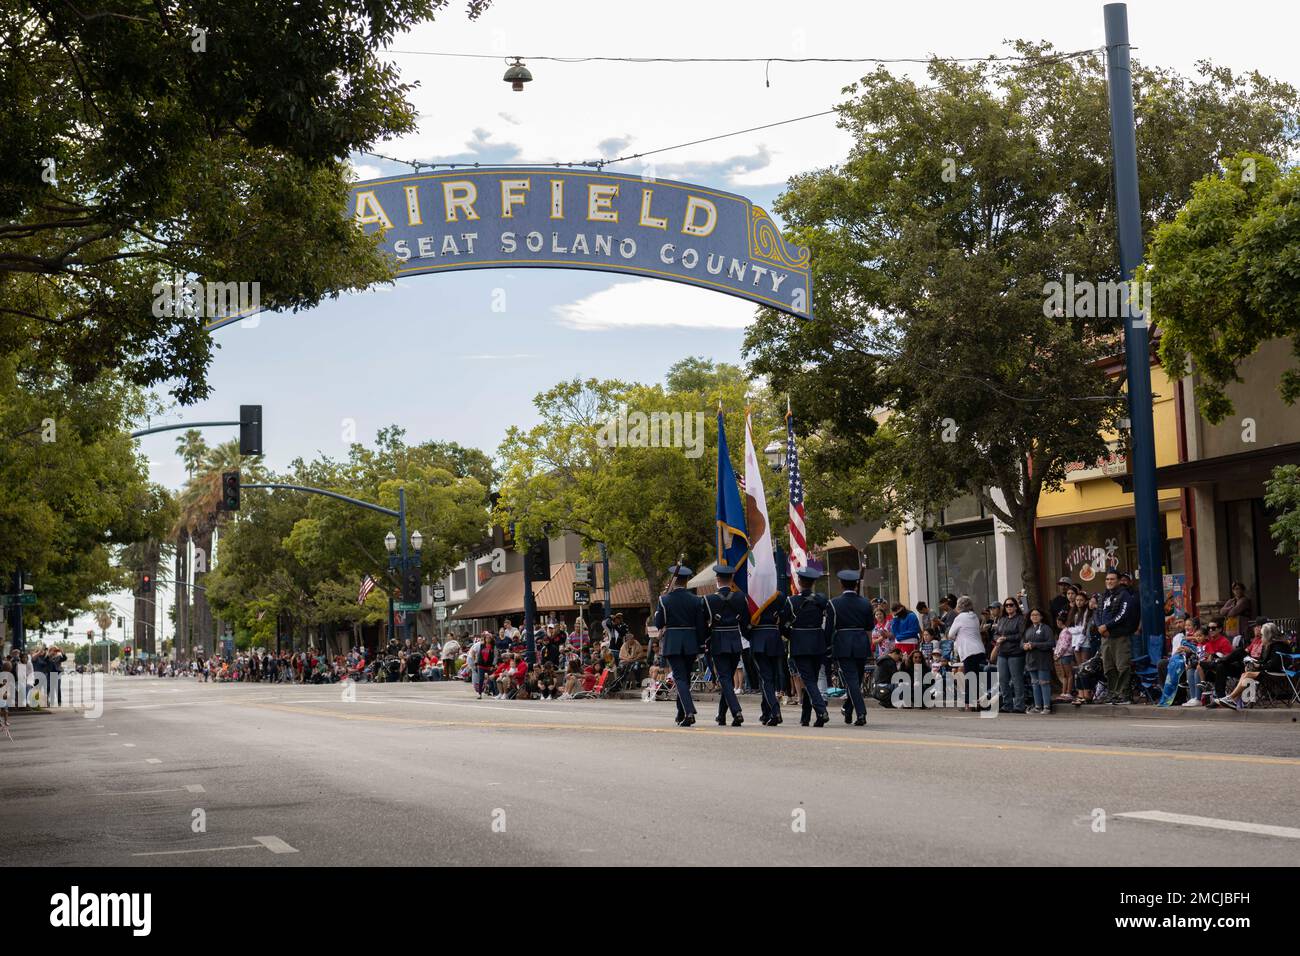 Travis Air Force Base Honor Guardsmen march in the “Independence Day Parade” in Fairfield, California, July 4, 2022. The Honor Guard mission is to support military funerals or community events involving presentations of the American flag. Stock Photo